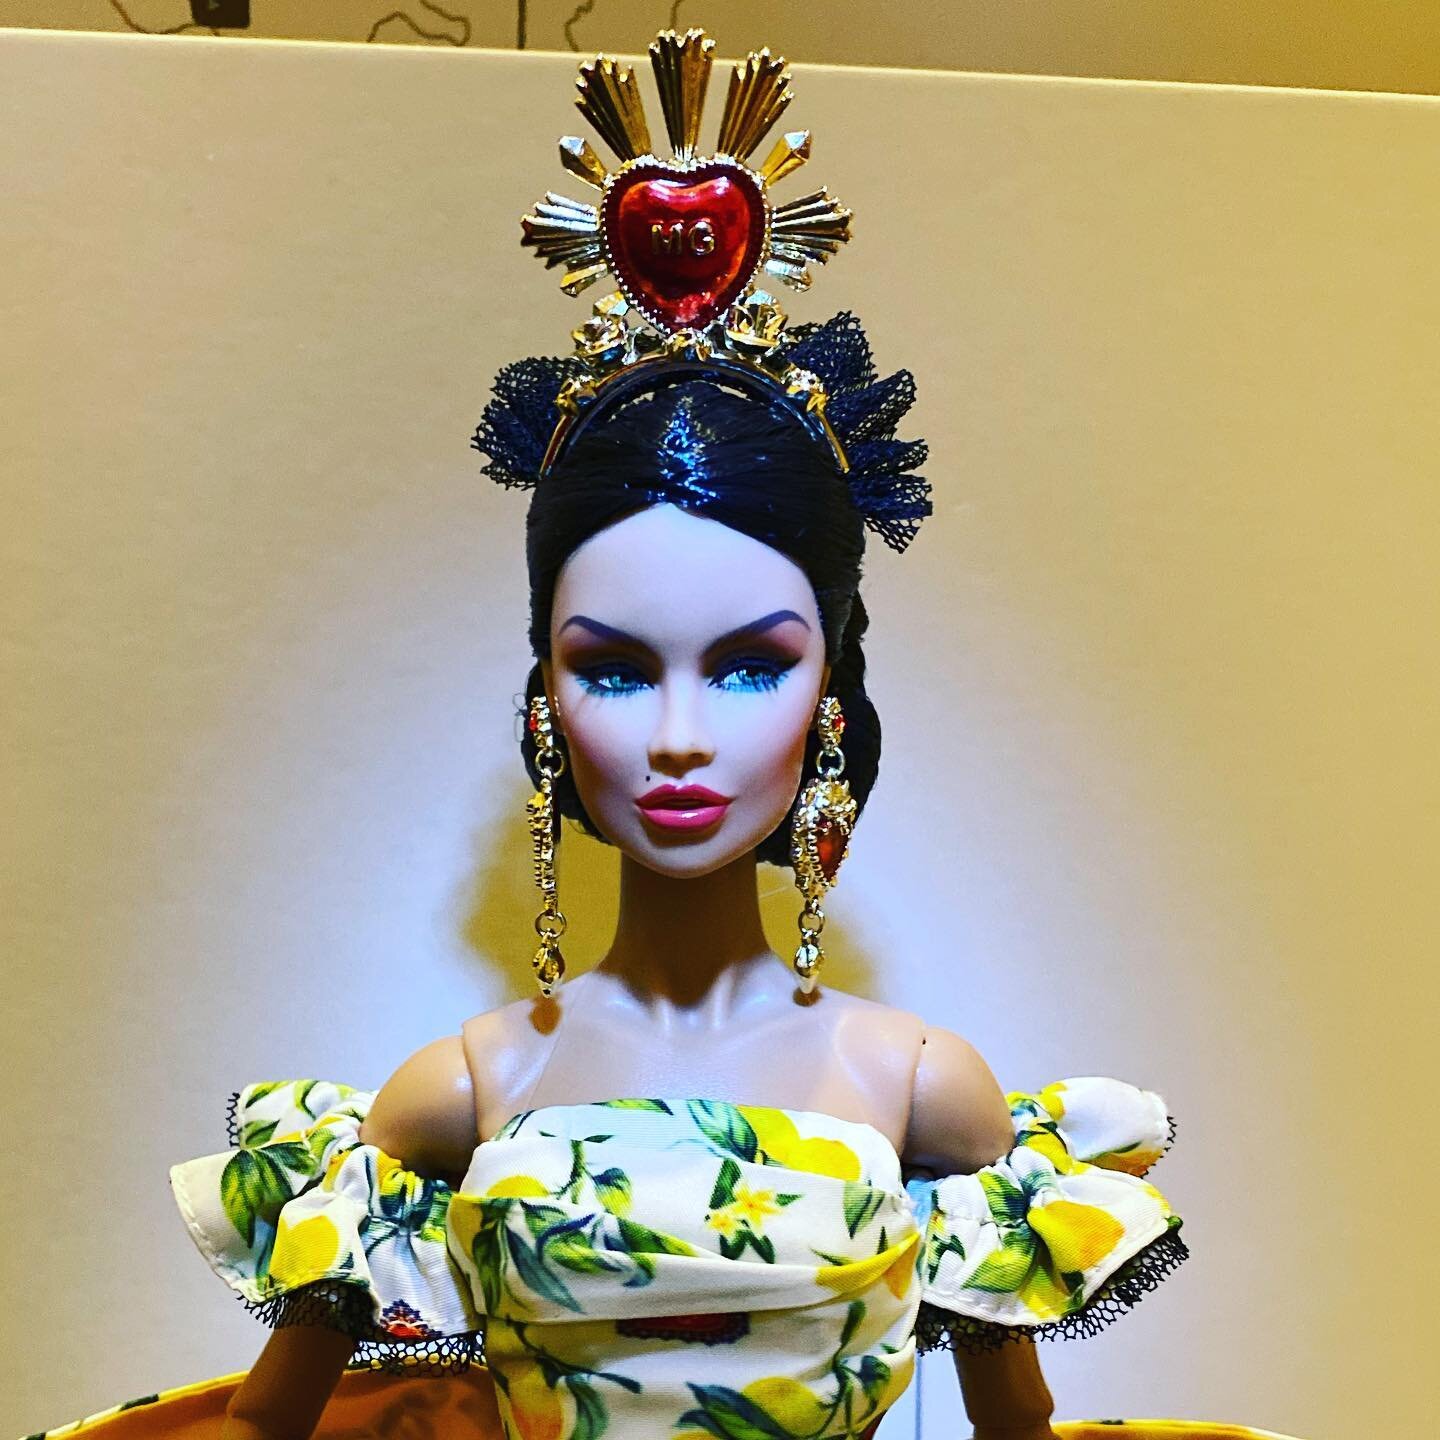 A taste of summer in the winter&hellip; Summer In Taormina Vanessa Perrin, a collaboration between @magia2000 and @integrity_toys #magia2000 #integritytoys #vanessaperrin #summerintaormina #fashionroyalty #fashiondoll #fashiondolls #doll #dolls #doll